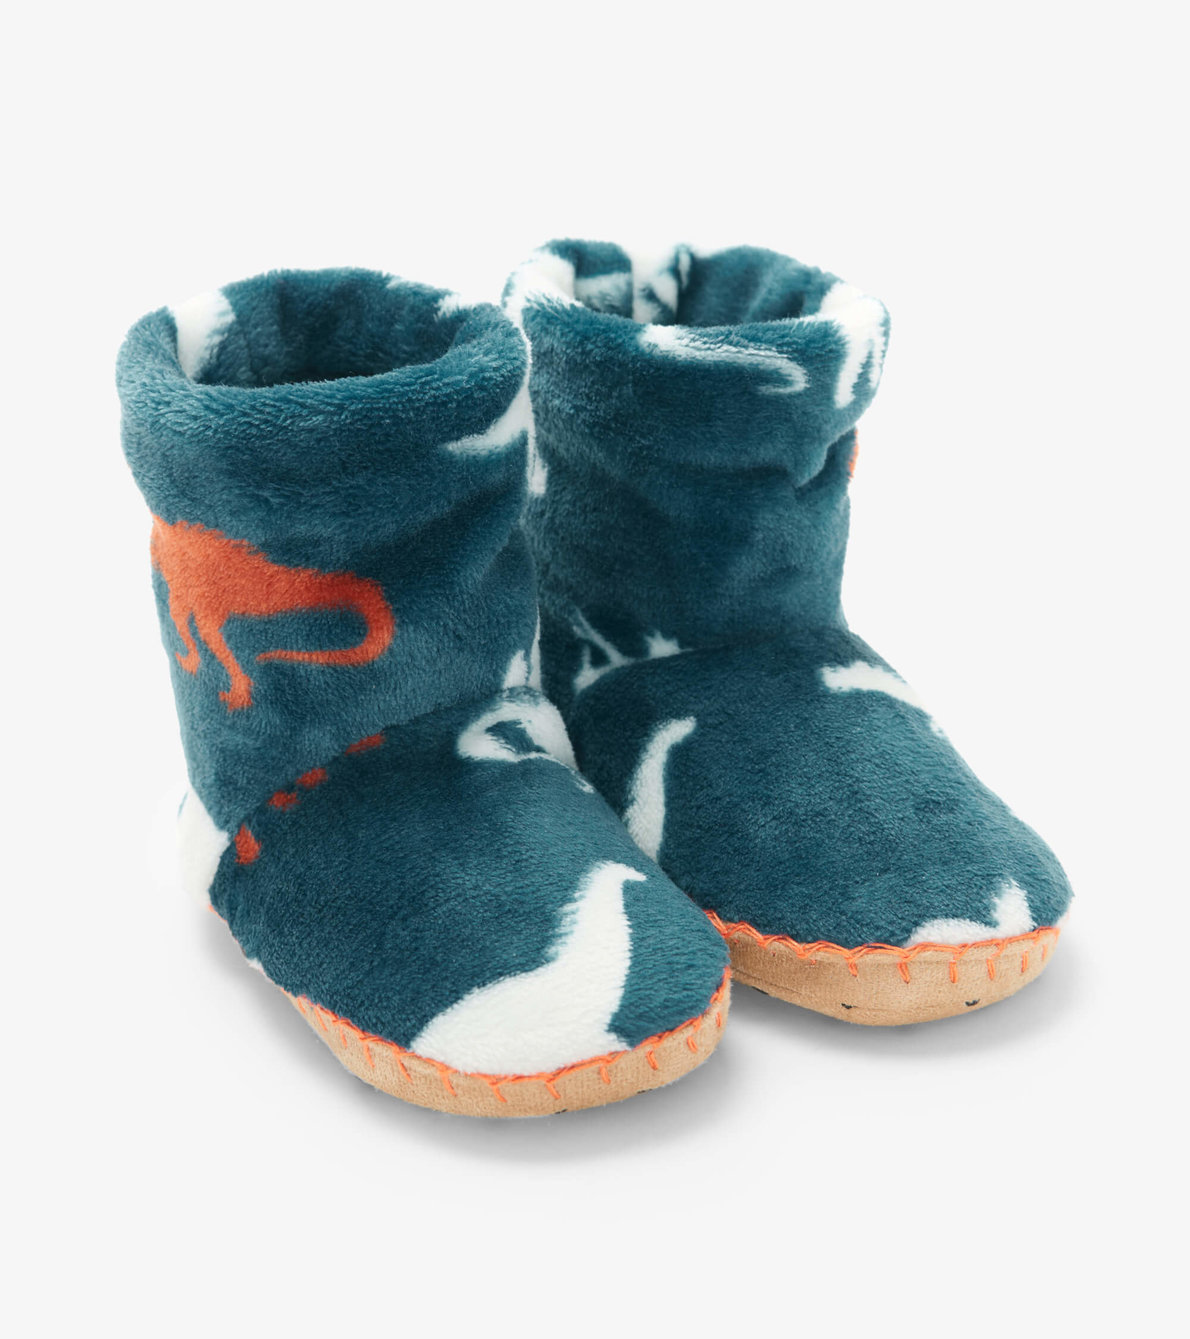 View larger image of Dino Silhouettes Fleece Slippers